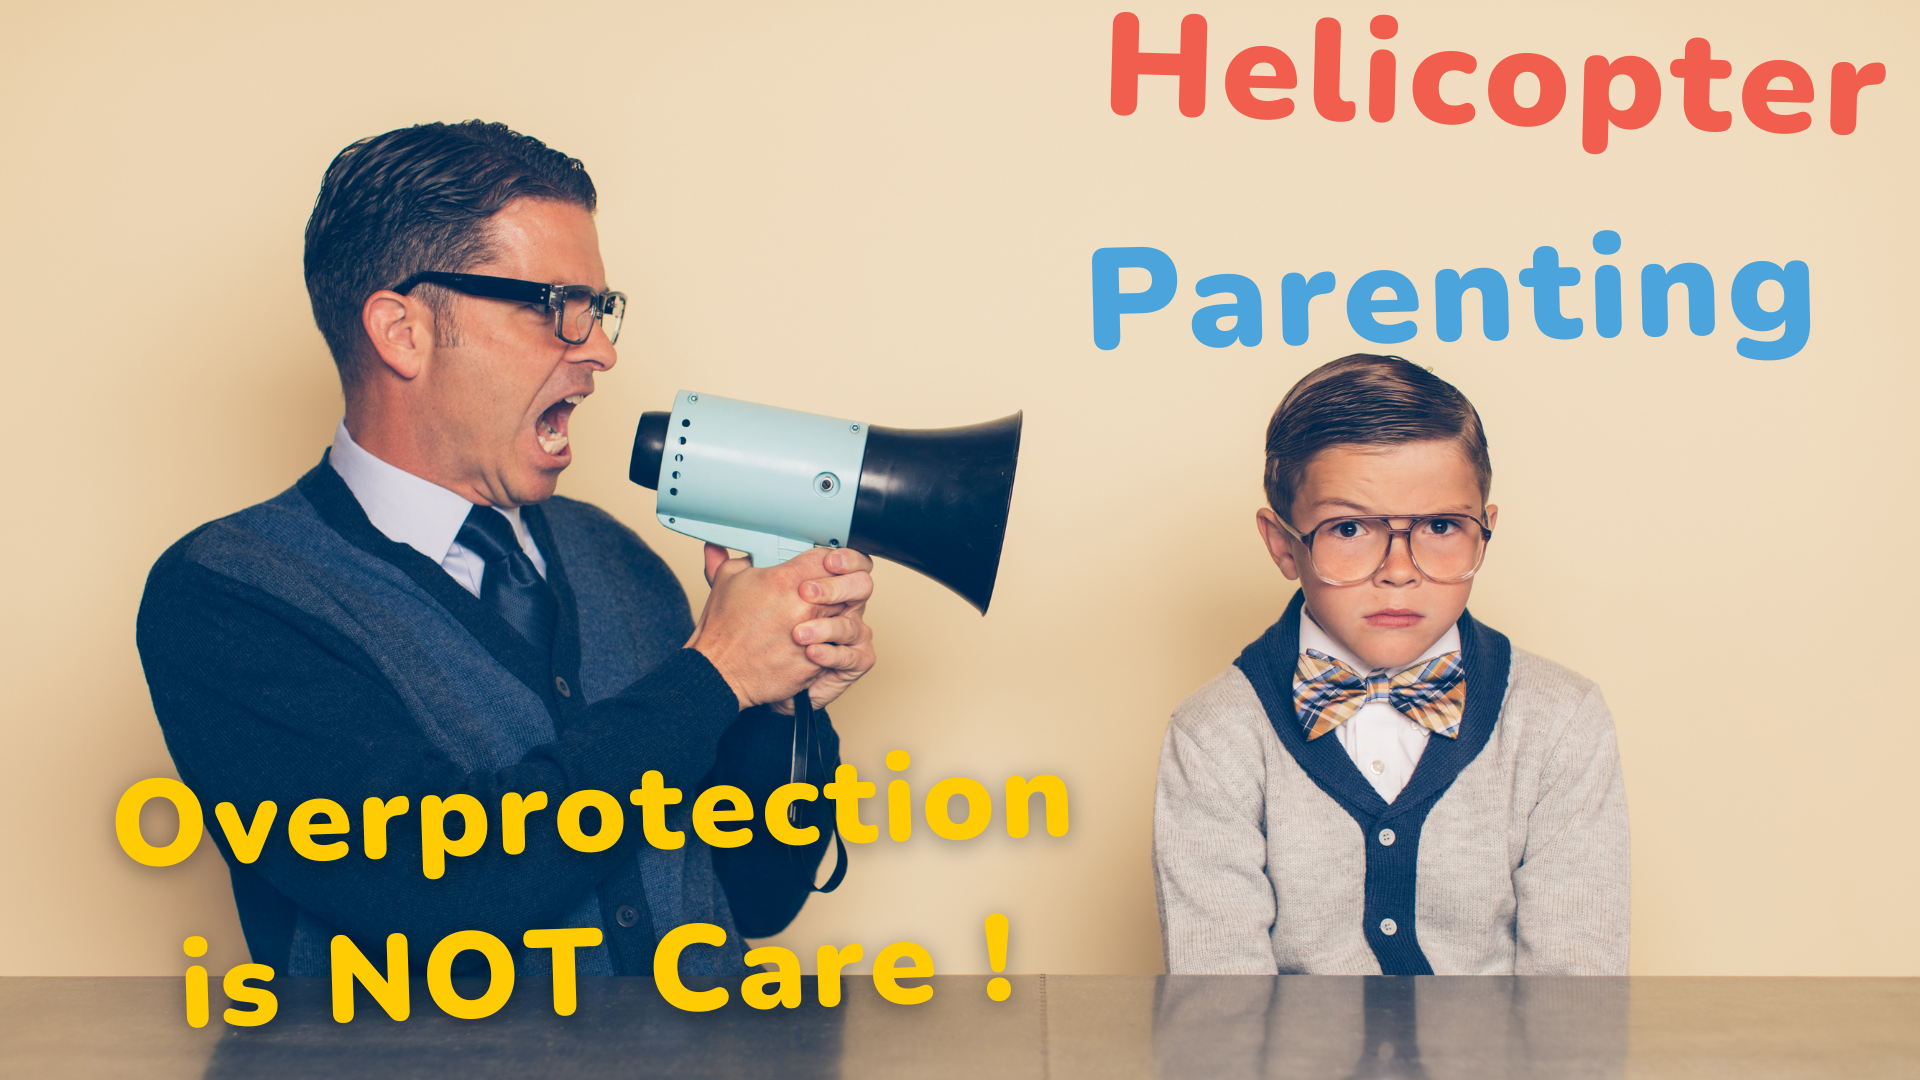 Helicopter Parenting: Finding Balance Between Care and Overprotection